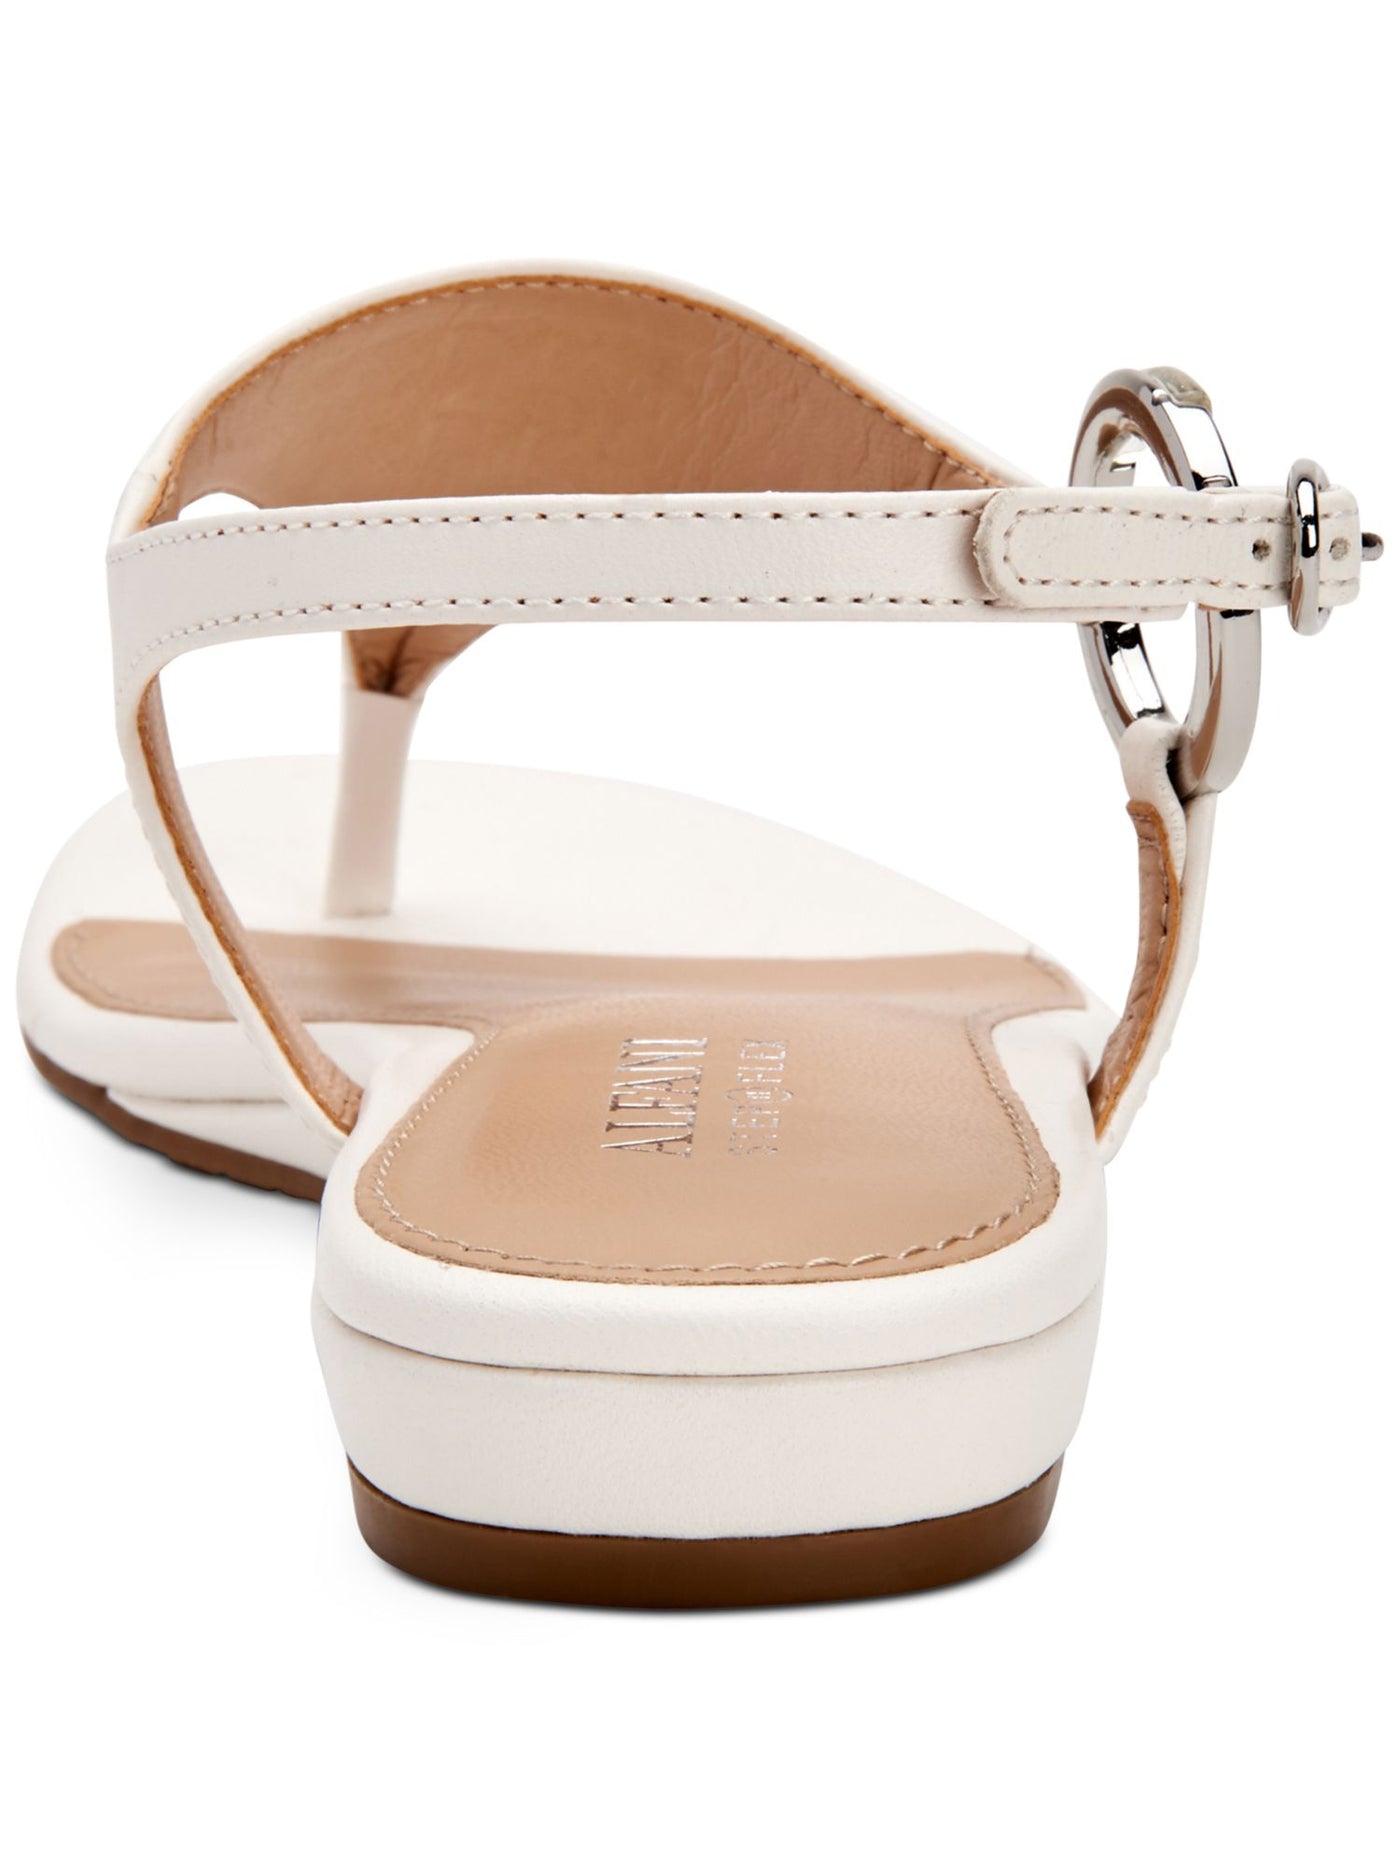 ALFANI Womens White Ring Hardware Shield Hayyden Round Toe Buckle Thong Sandals Shoes 5 M